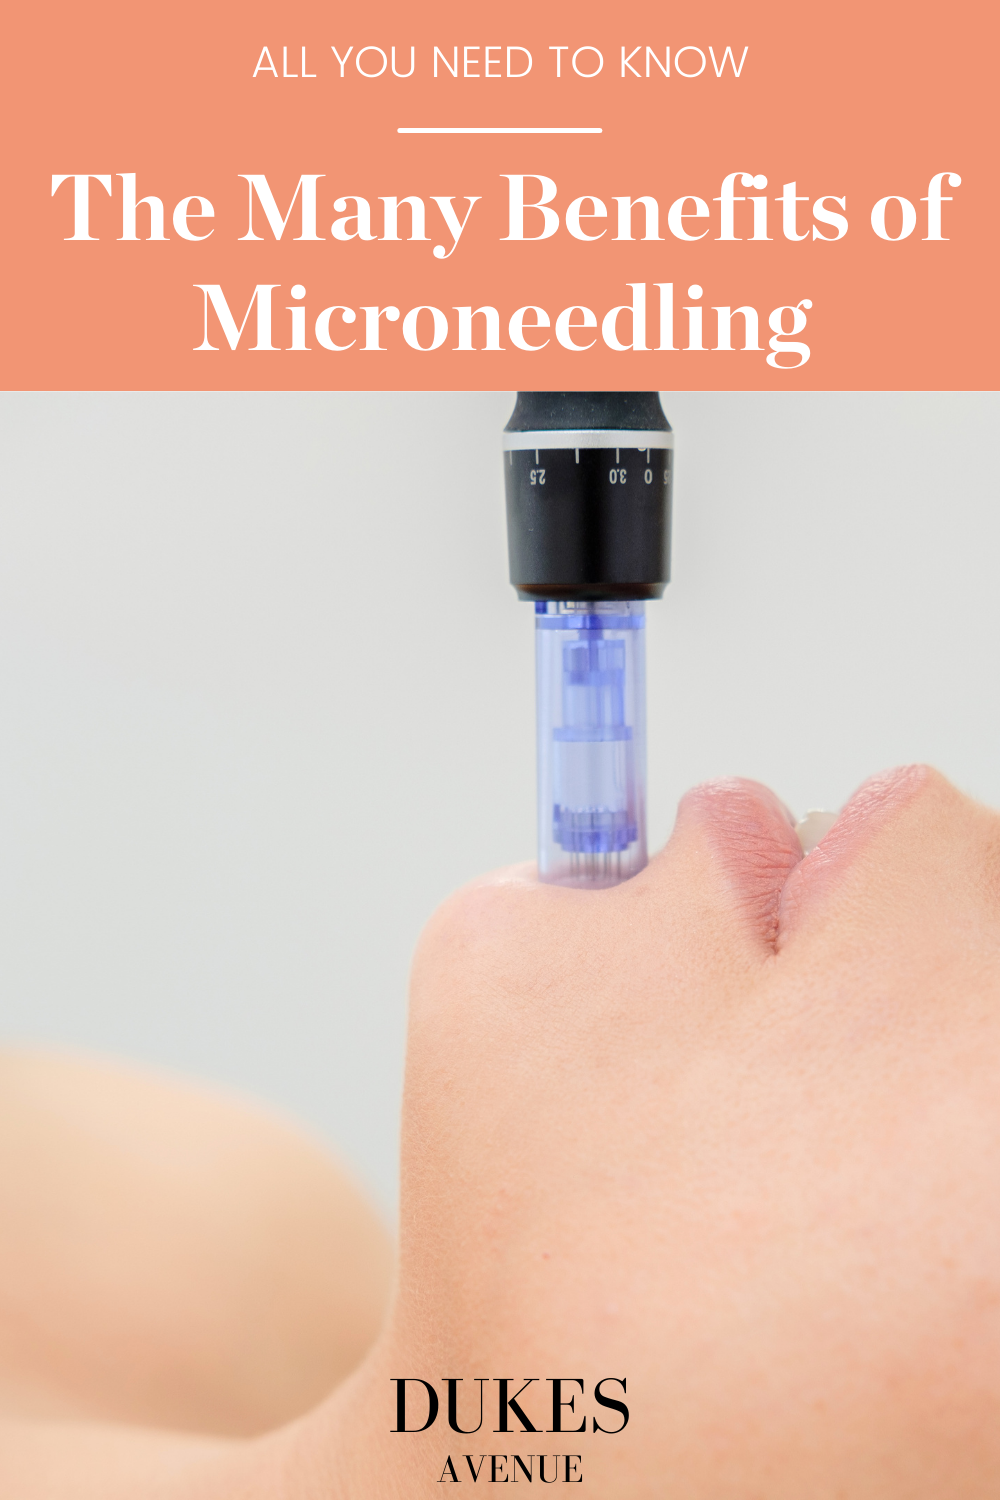 Woman laying down receiving microneedling treatment on her chin, with text overlay 'the many benefits of microneedling'